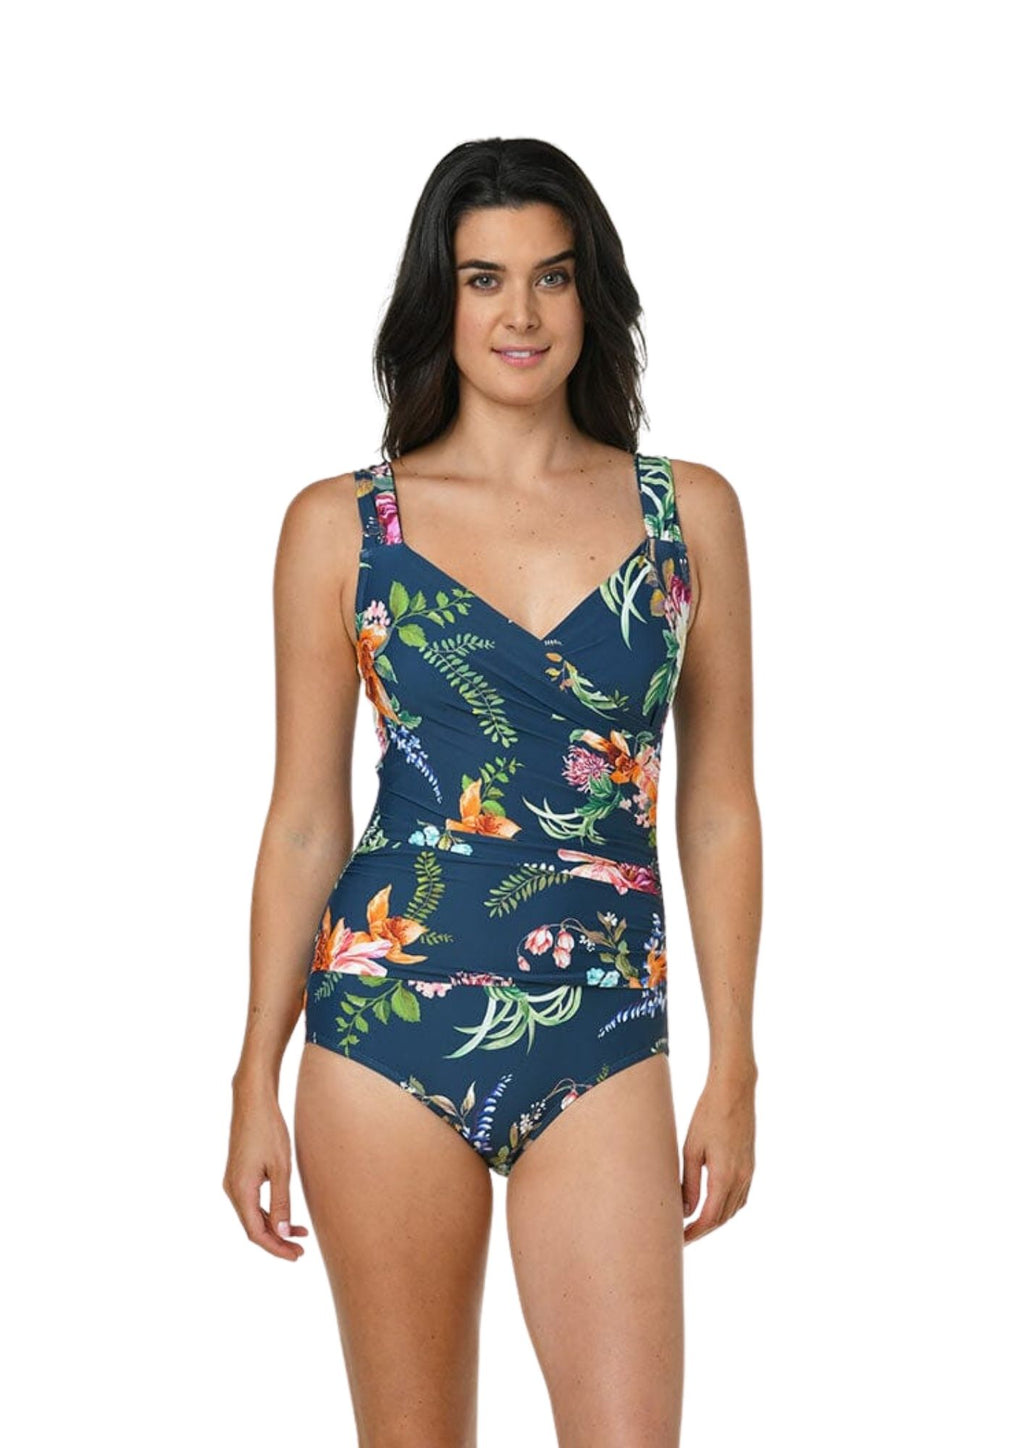 Floral one piece